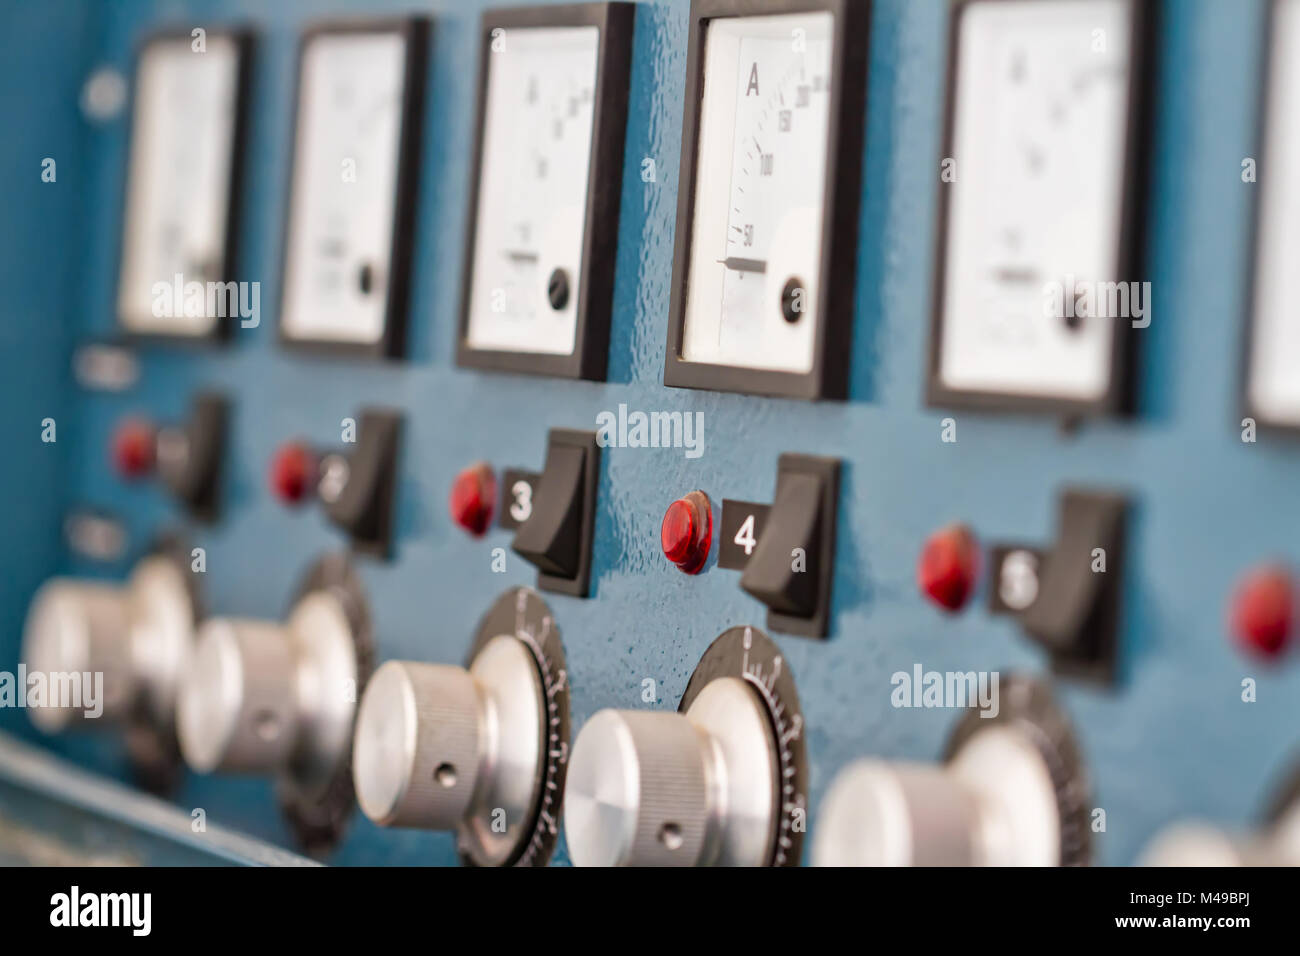 Instrument panel with circuit breakers and switches Stock Photo